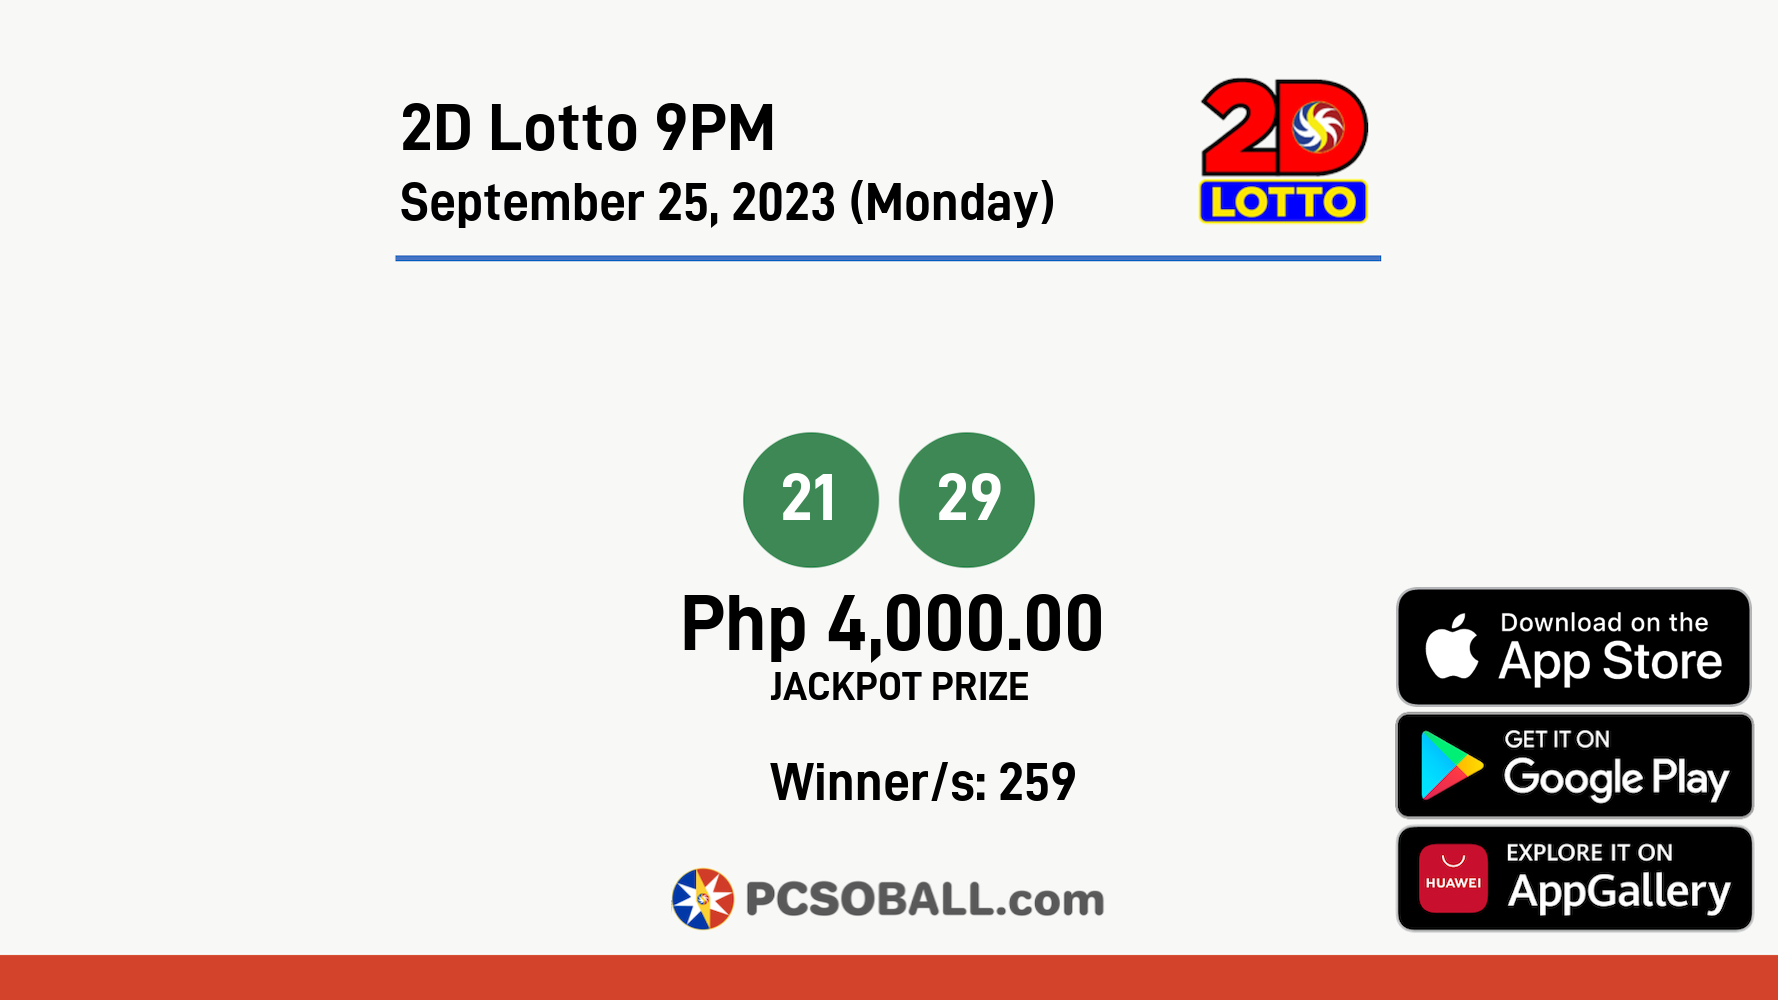 2D Lotto 9PM September 25, 2023 (Monday) Result